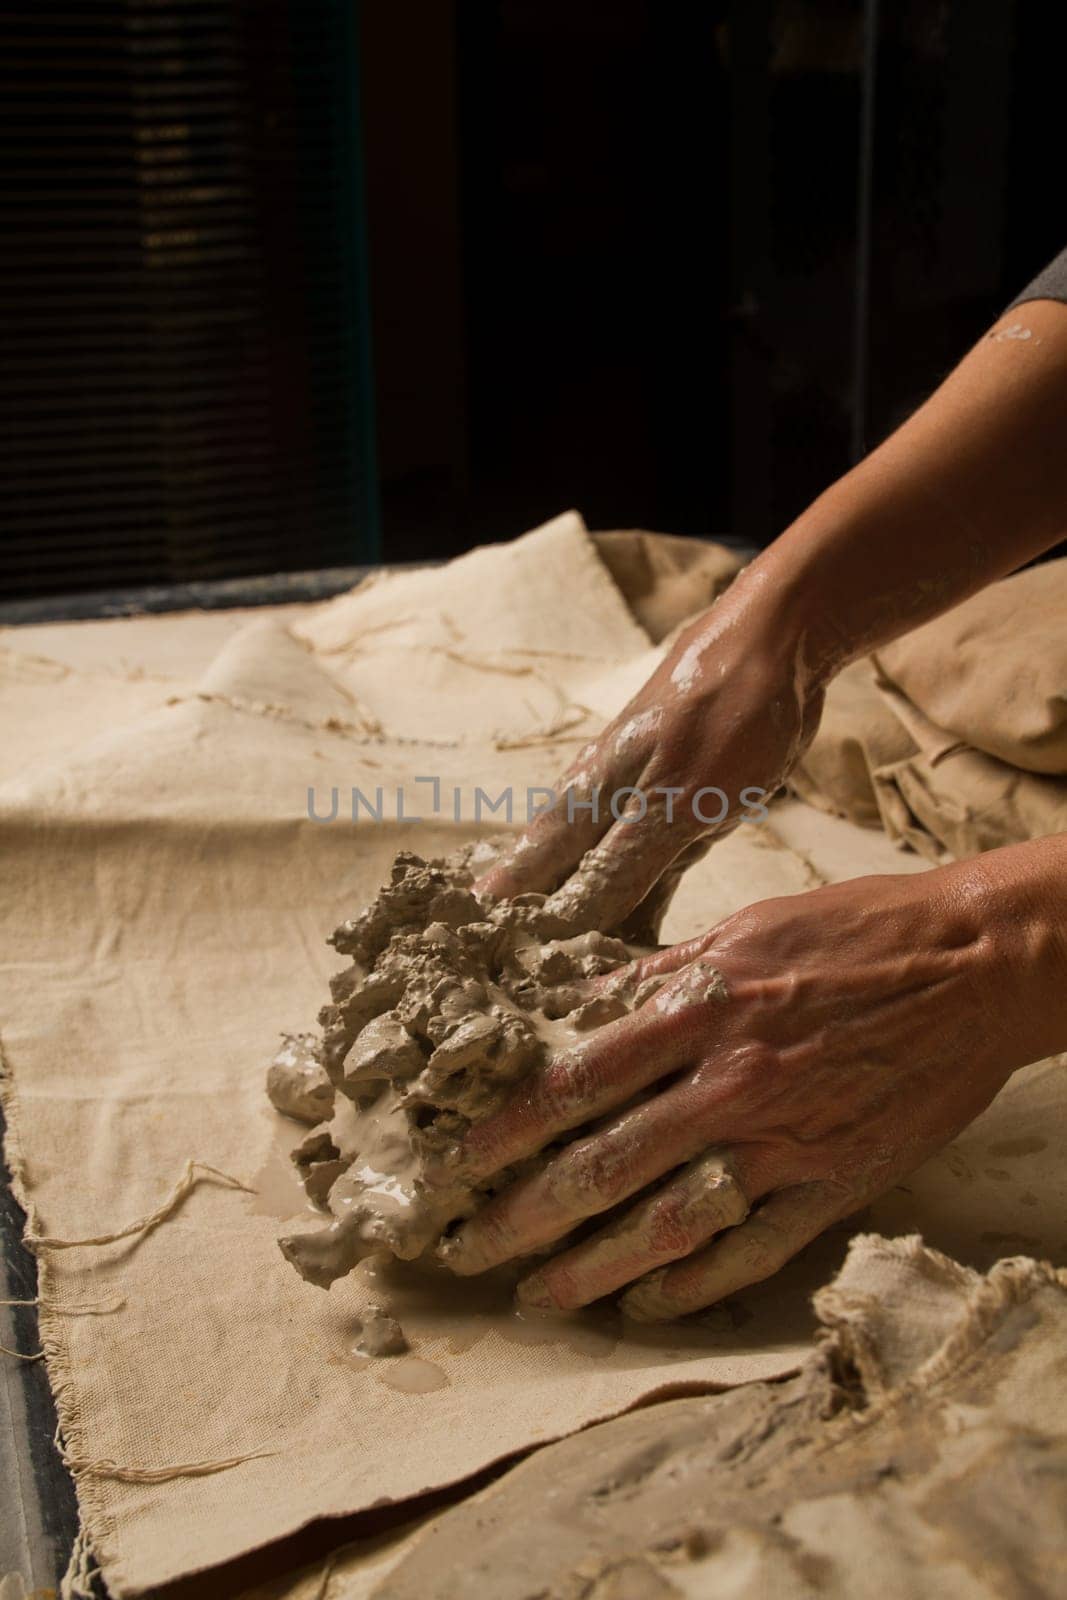 Artisan Hands Kneading Clay in Warmly Lit Pottery Studio by njproductions